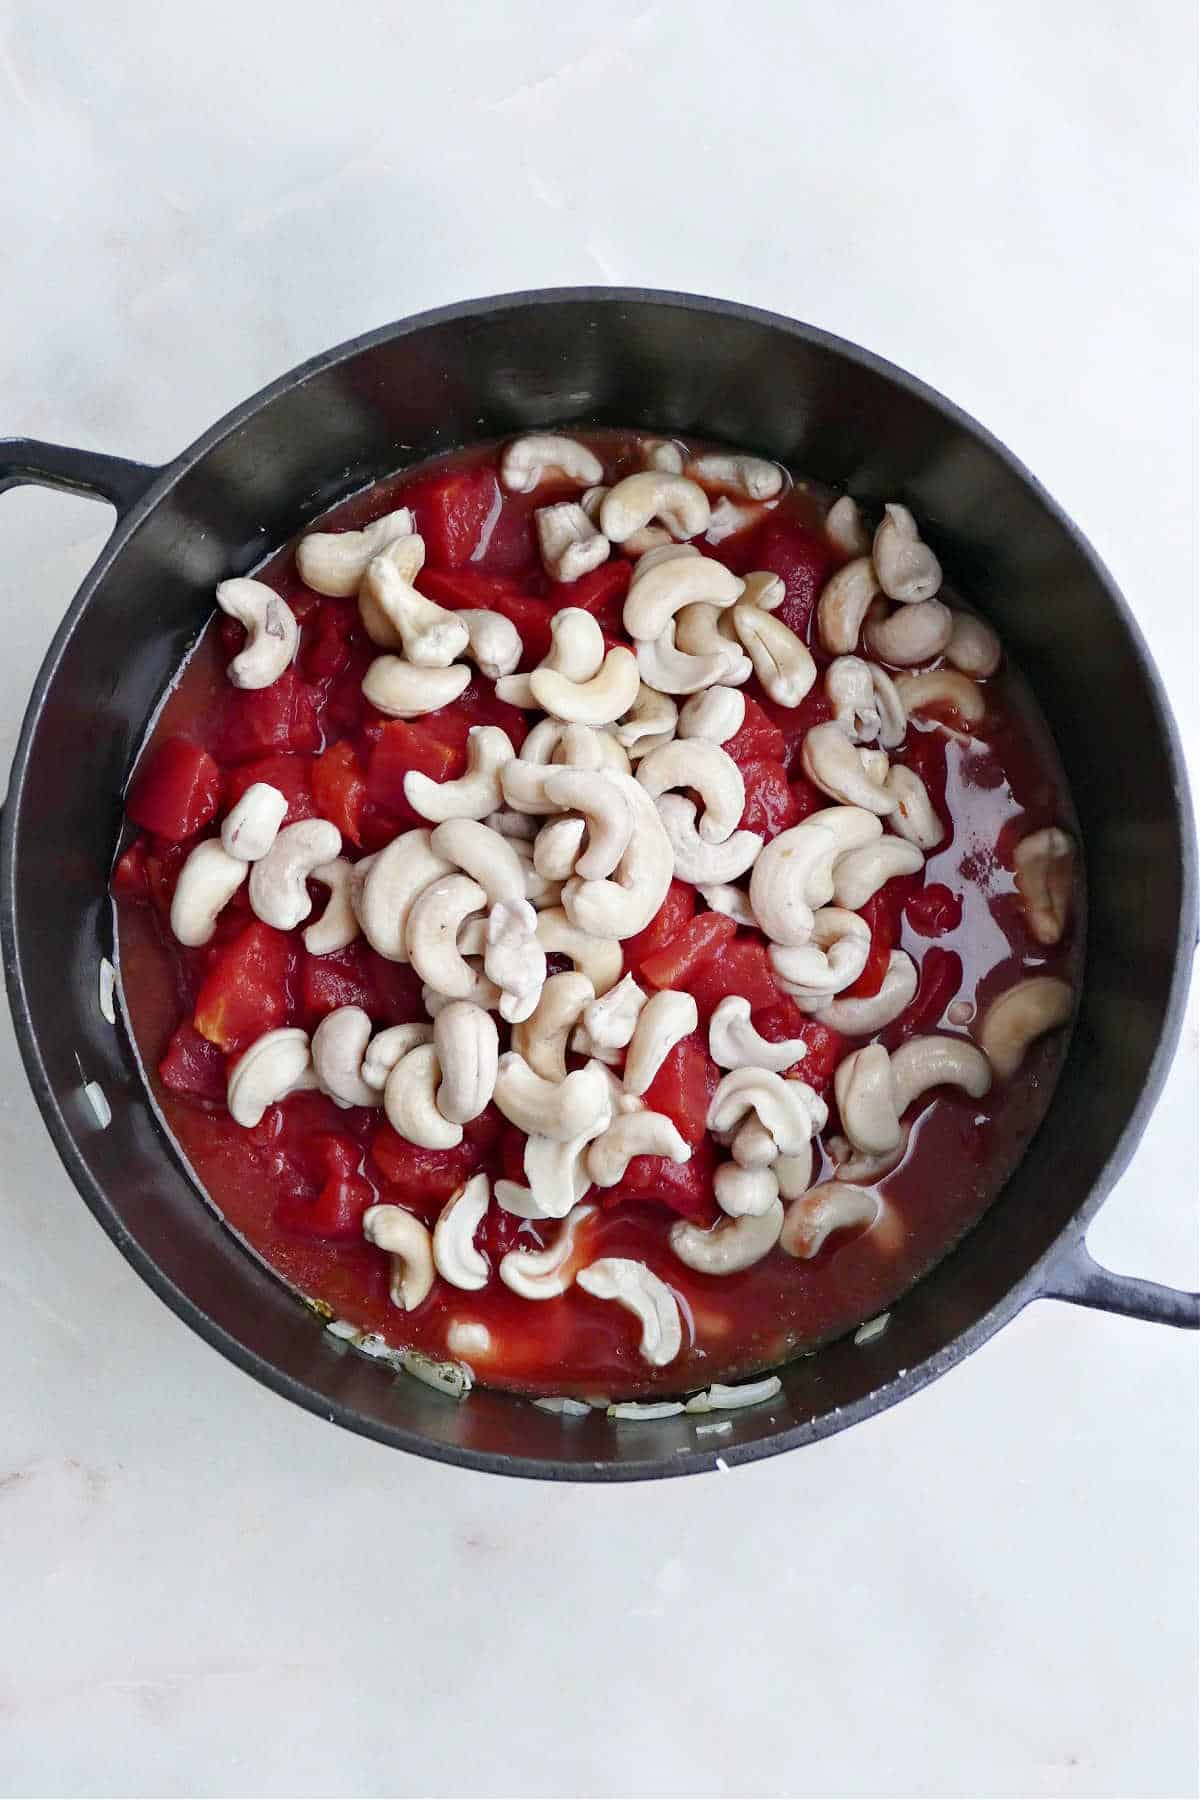 diced tomatoes, onion, garlic, and soaked cashews cooking a large soup pot